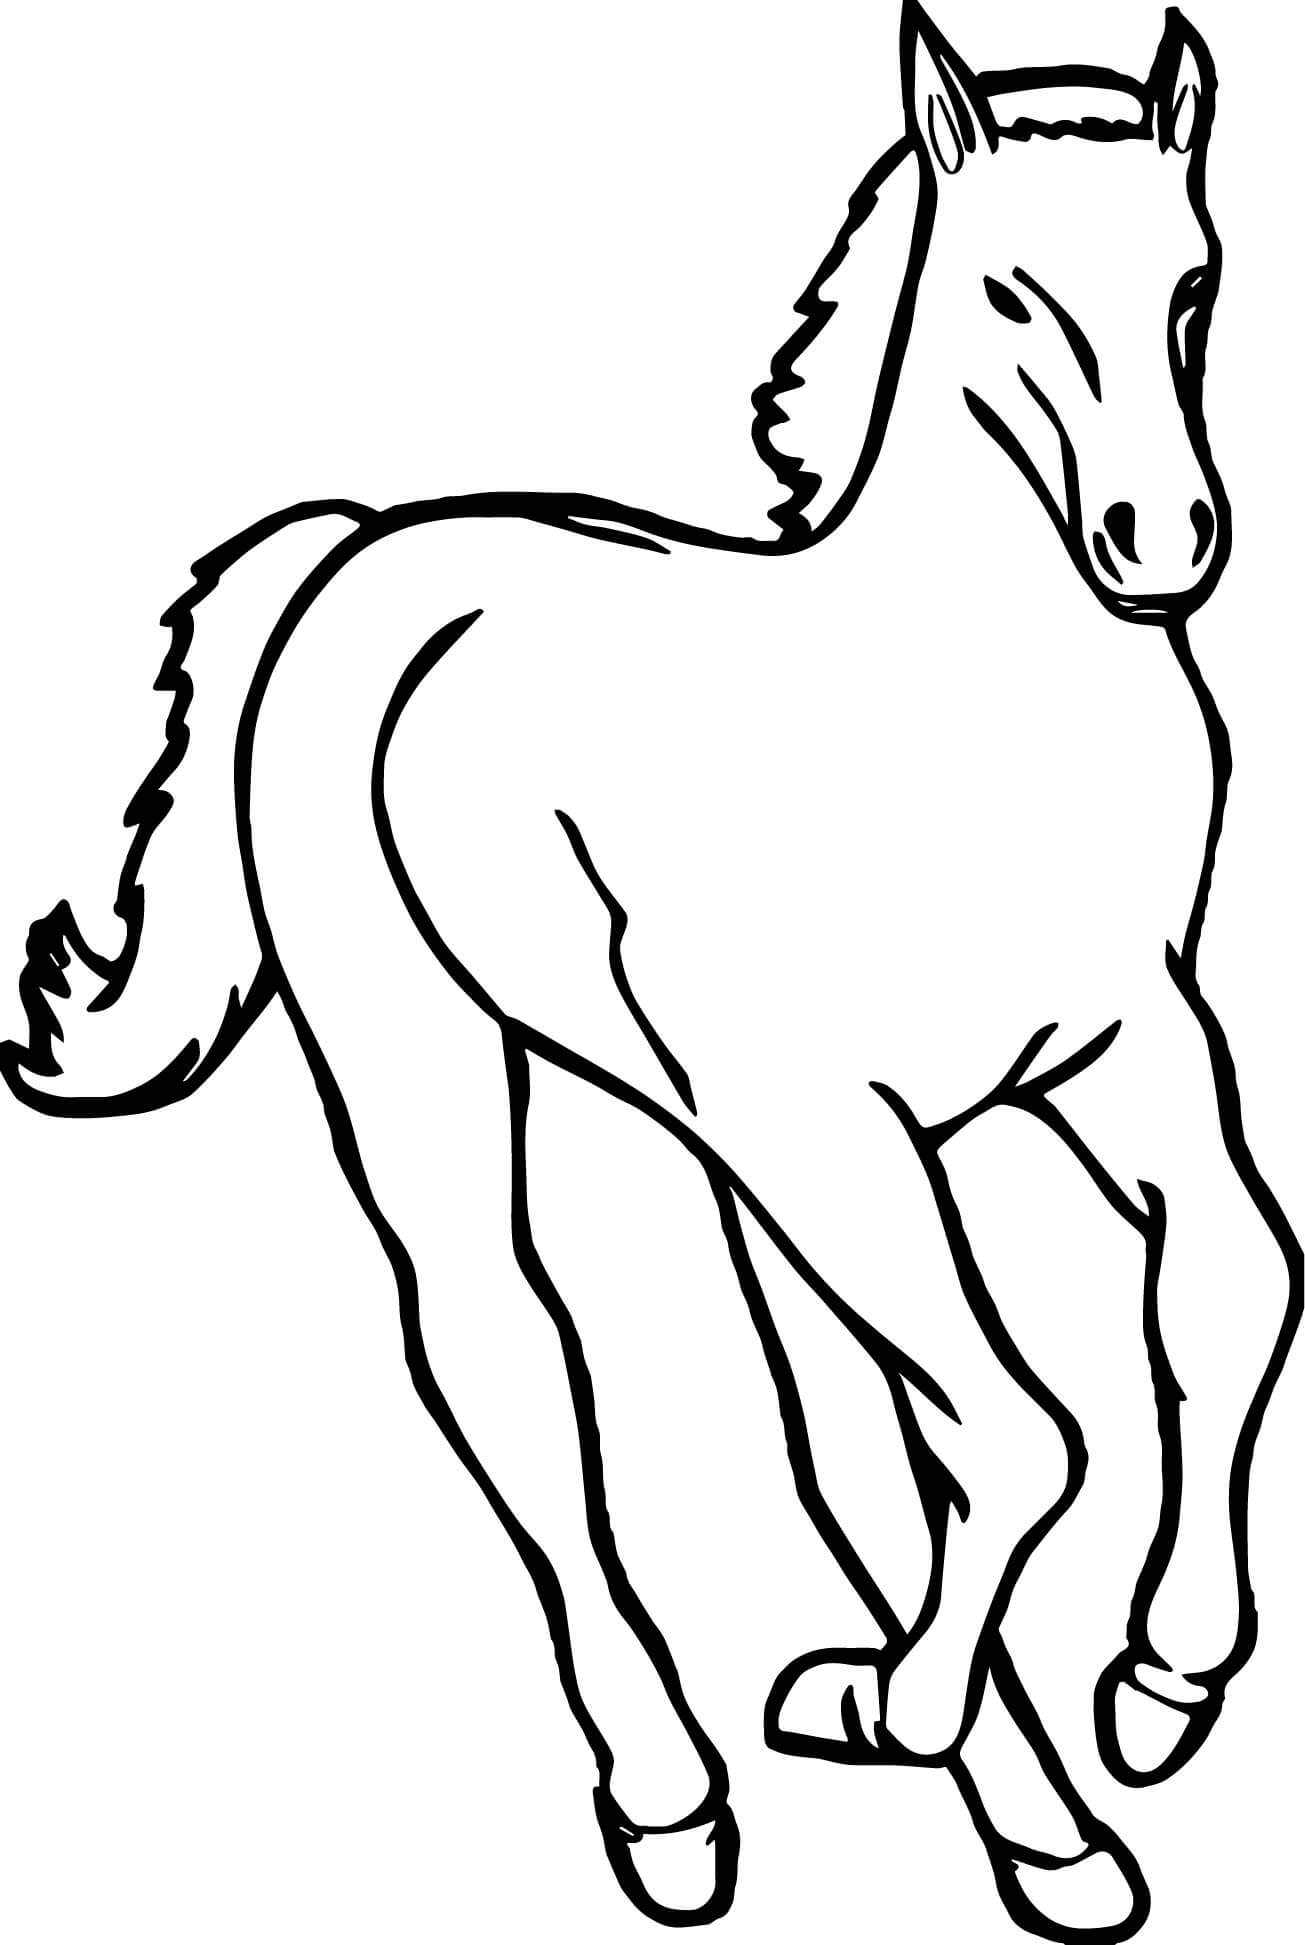 Running Pony Coloring Page